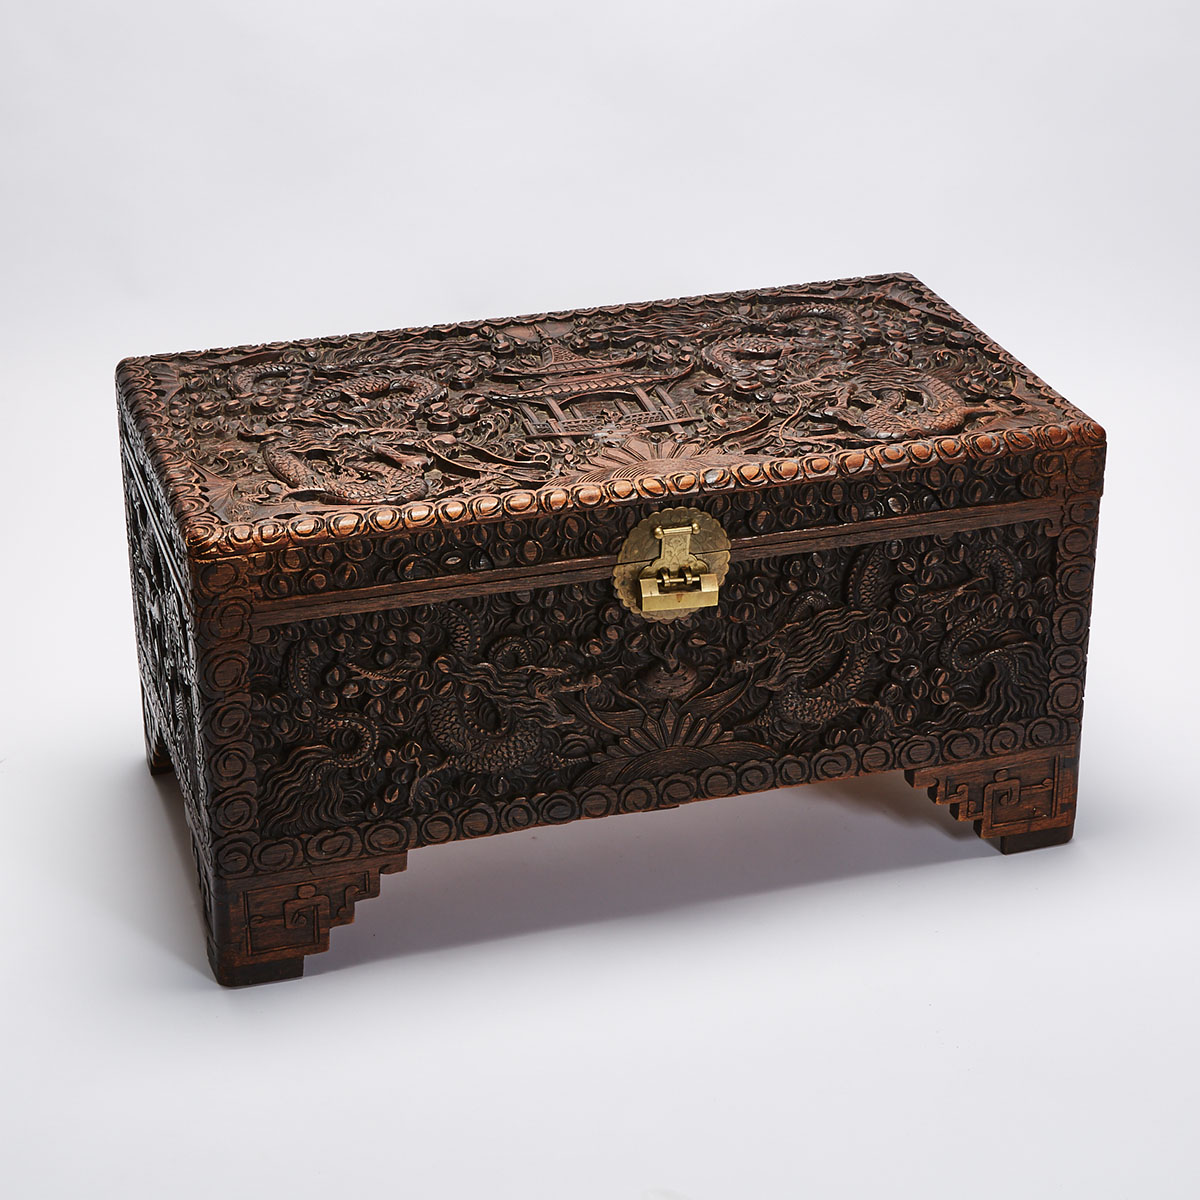 A Large Camphor Wood Carved Traveling Chest, Early 20th Century